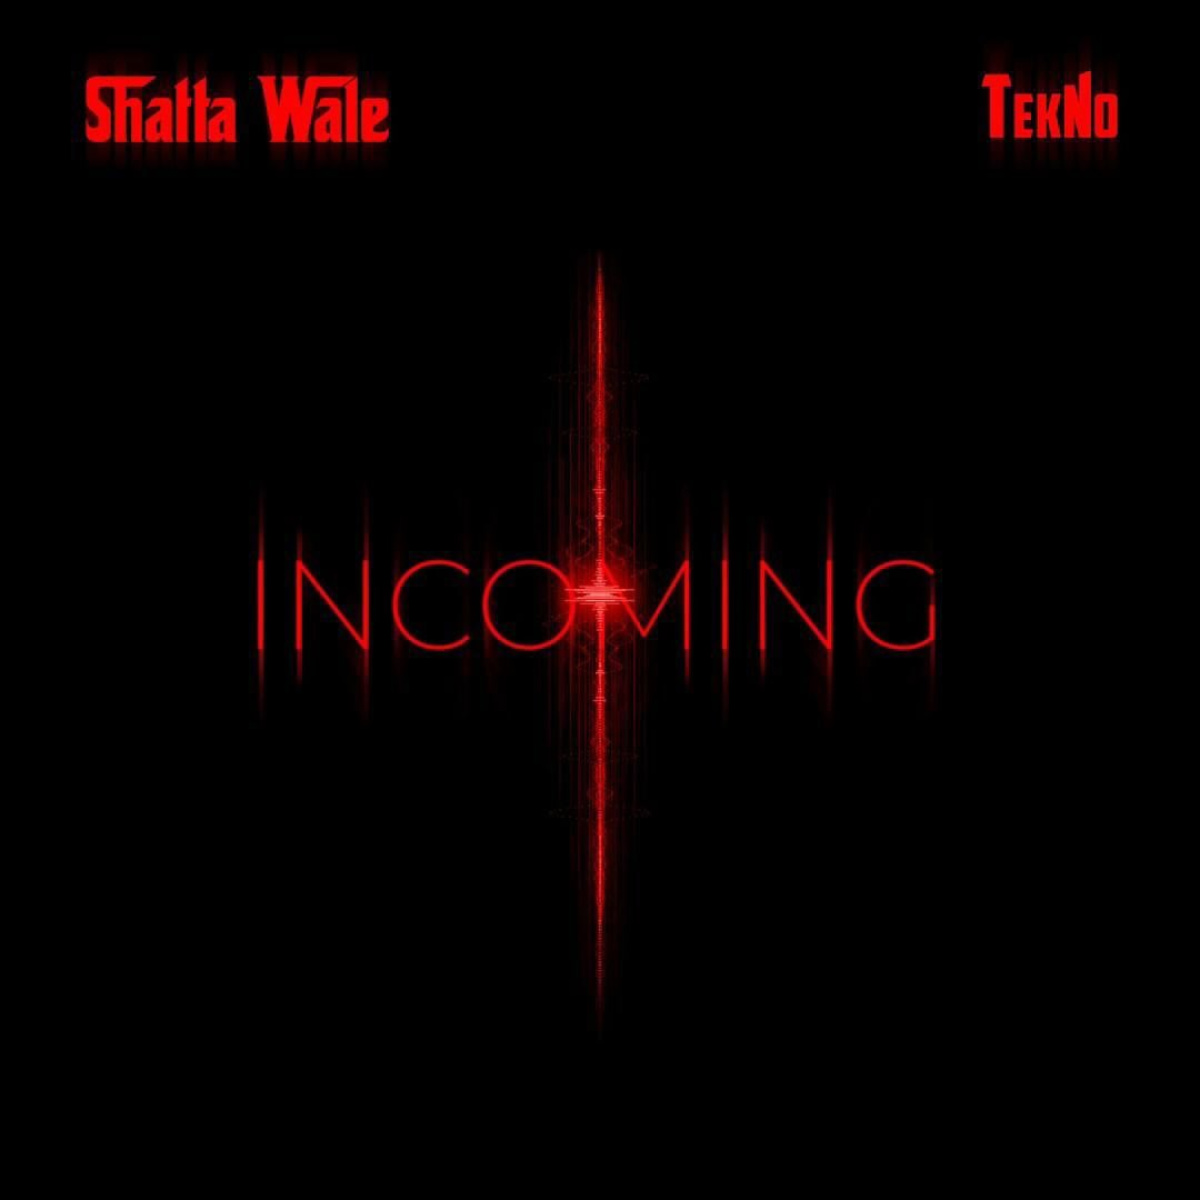 Incoming by Shatta Wale & Tekno